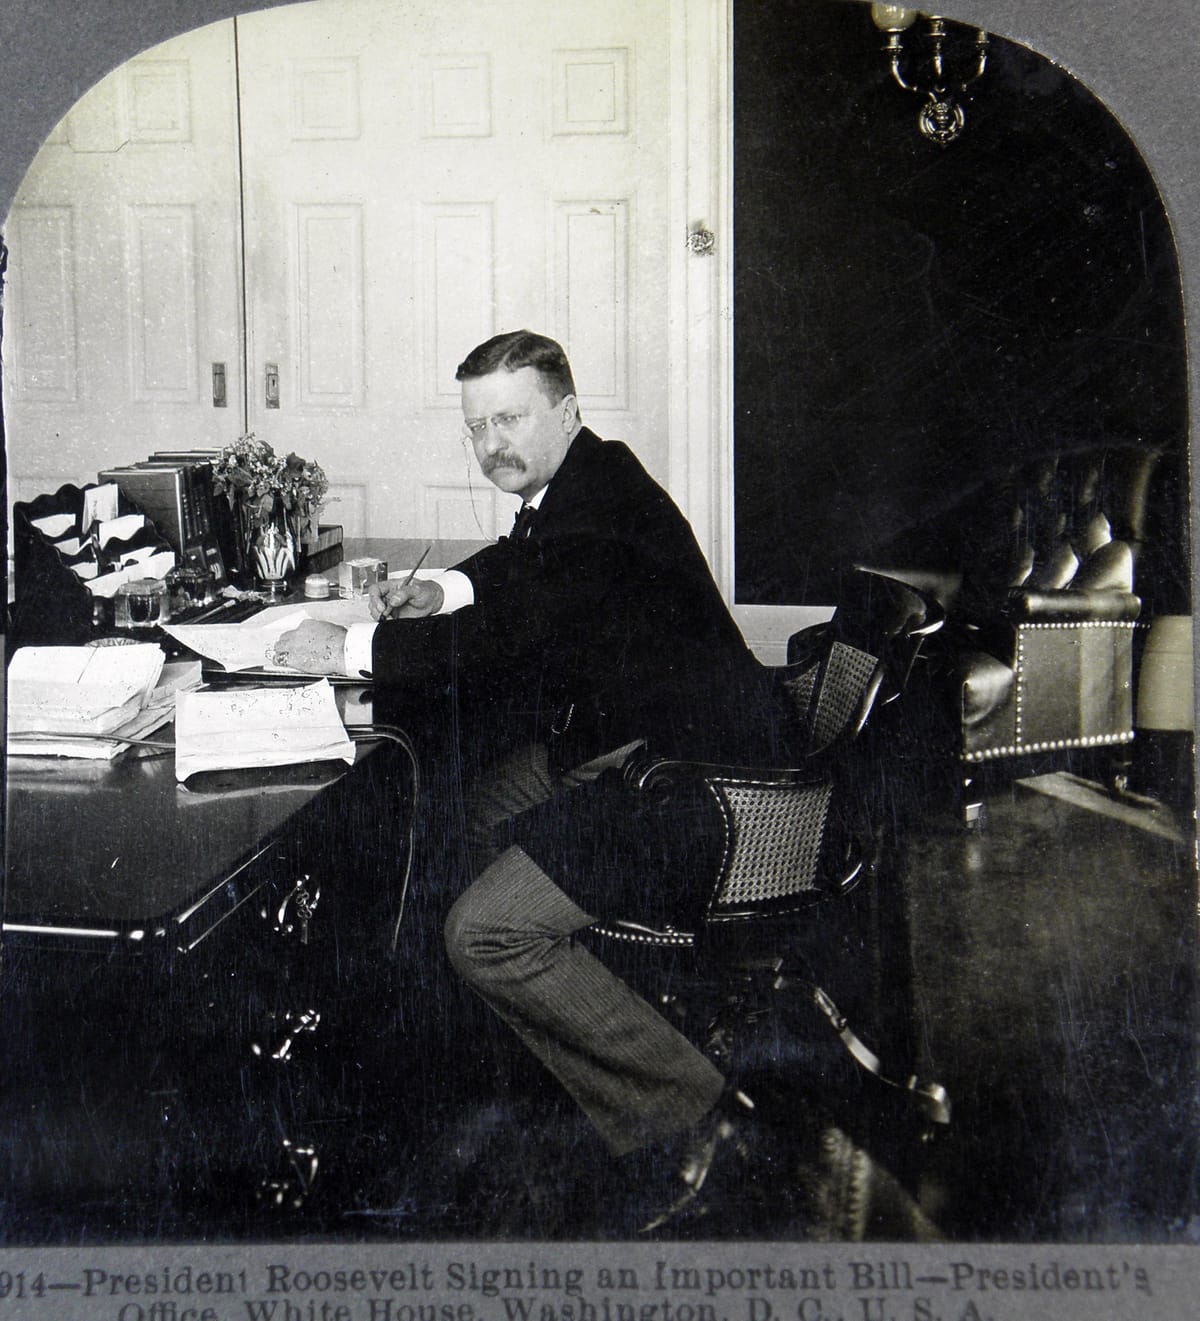 Picture of President Roosevelt captioned, "President Roosevelt Signing an Important Bill."